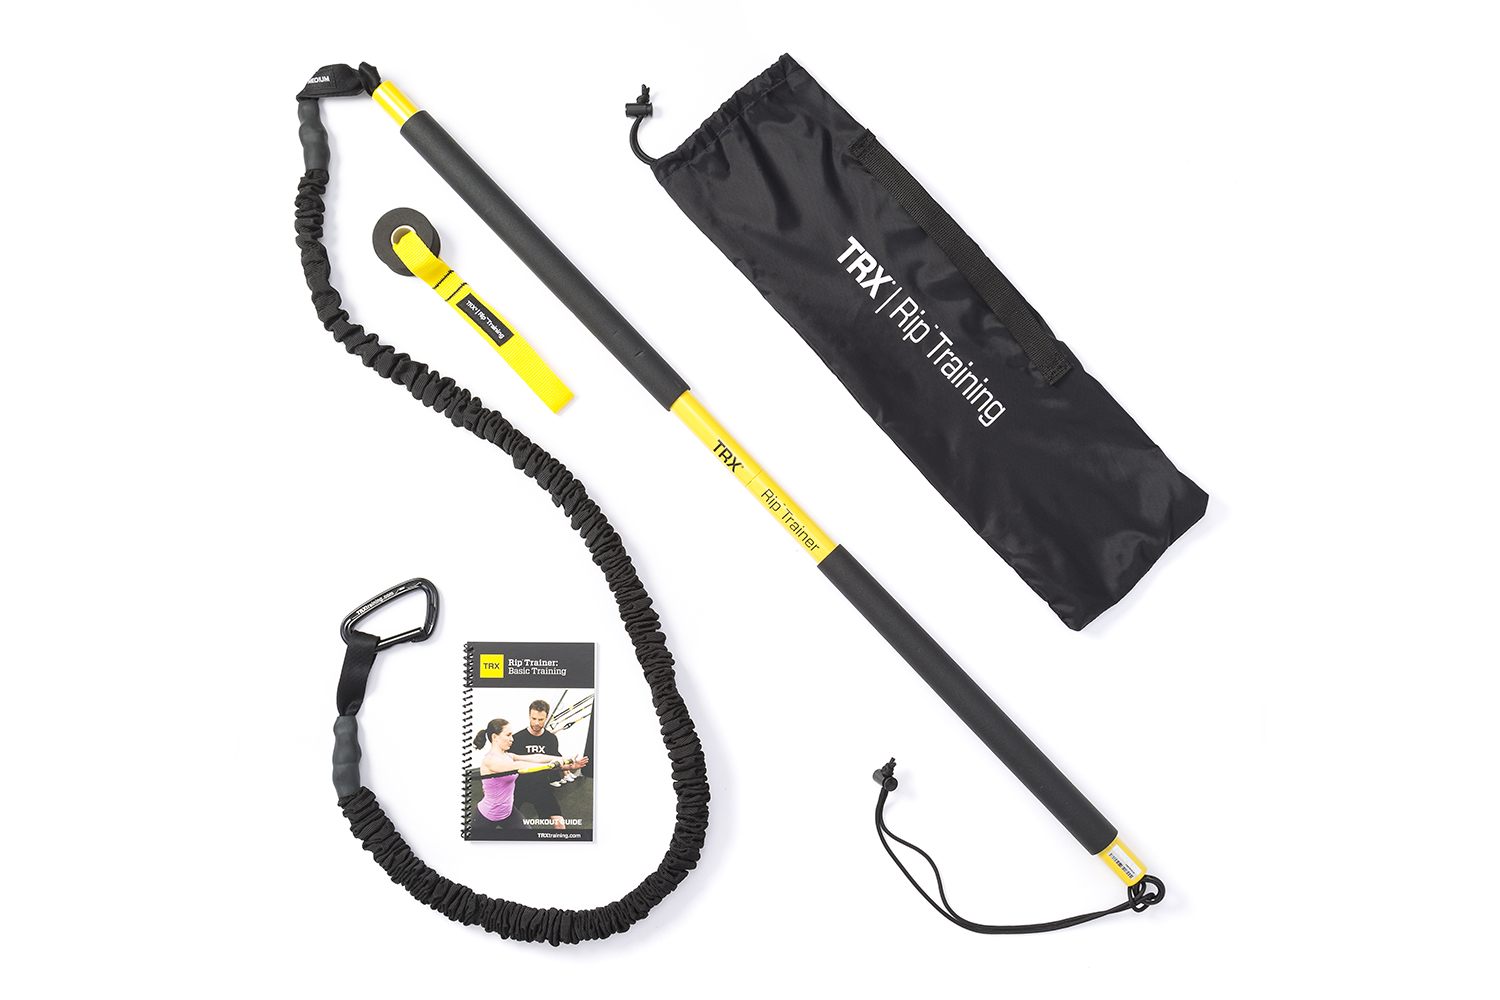 TRX Rip Trainer Home Workout Equipment